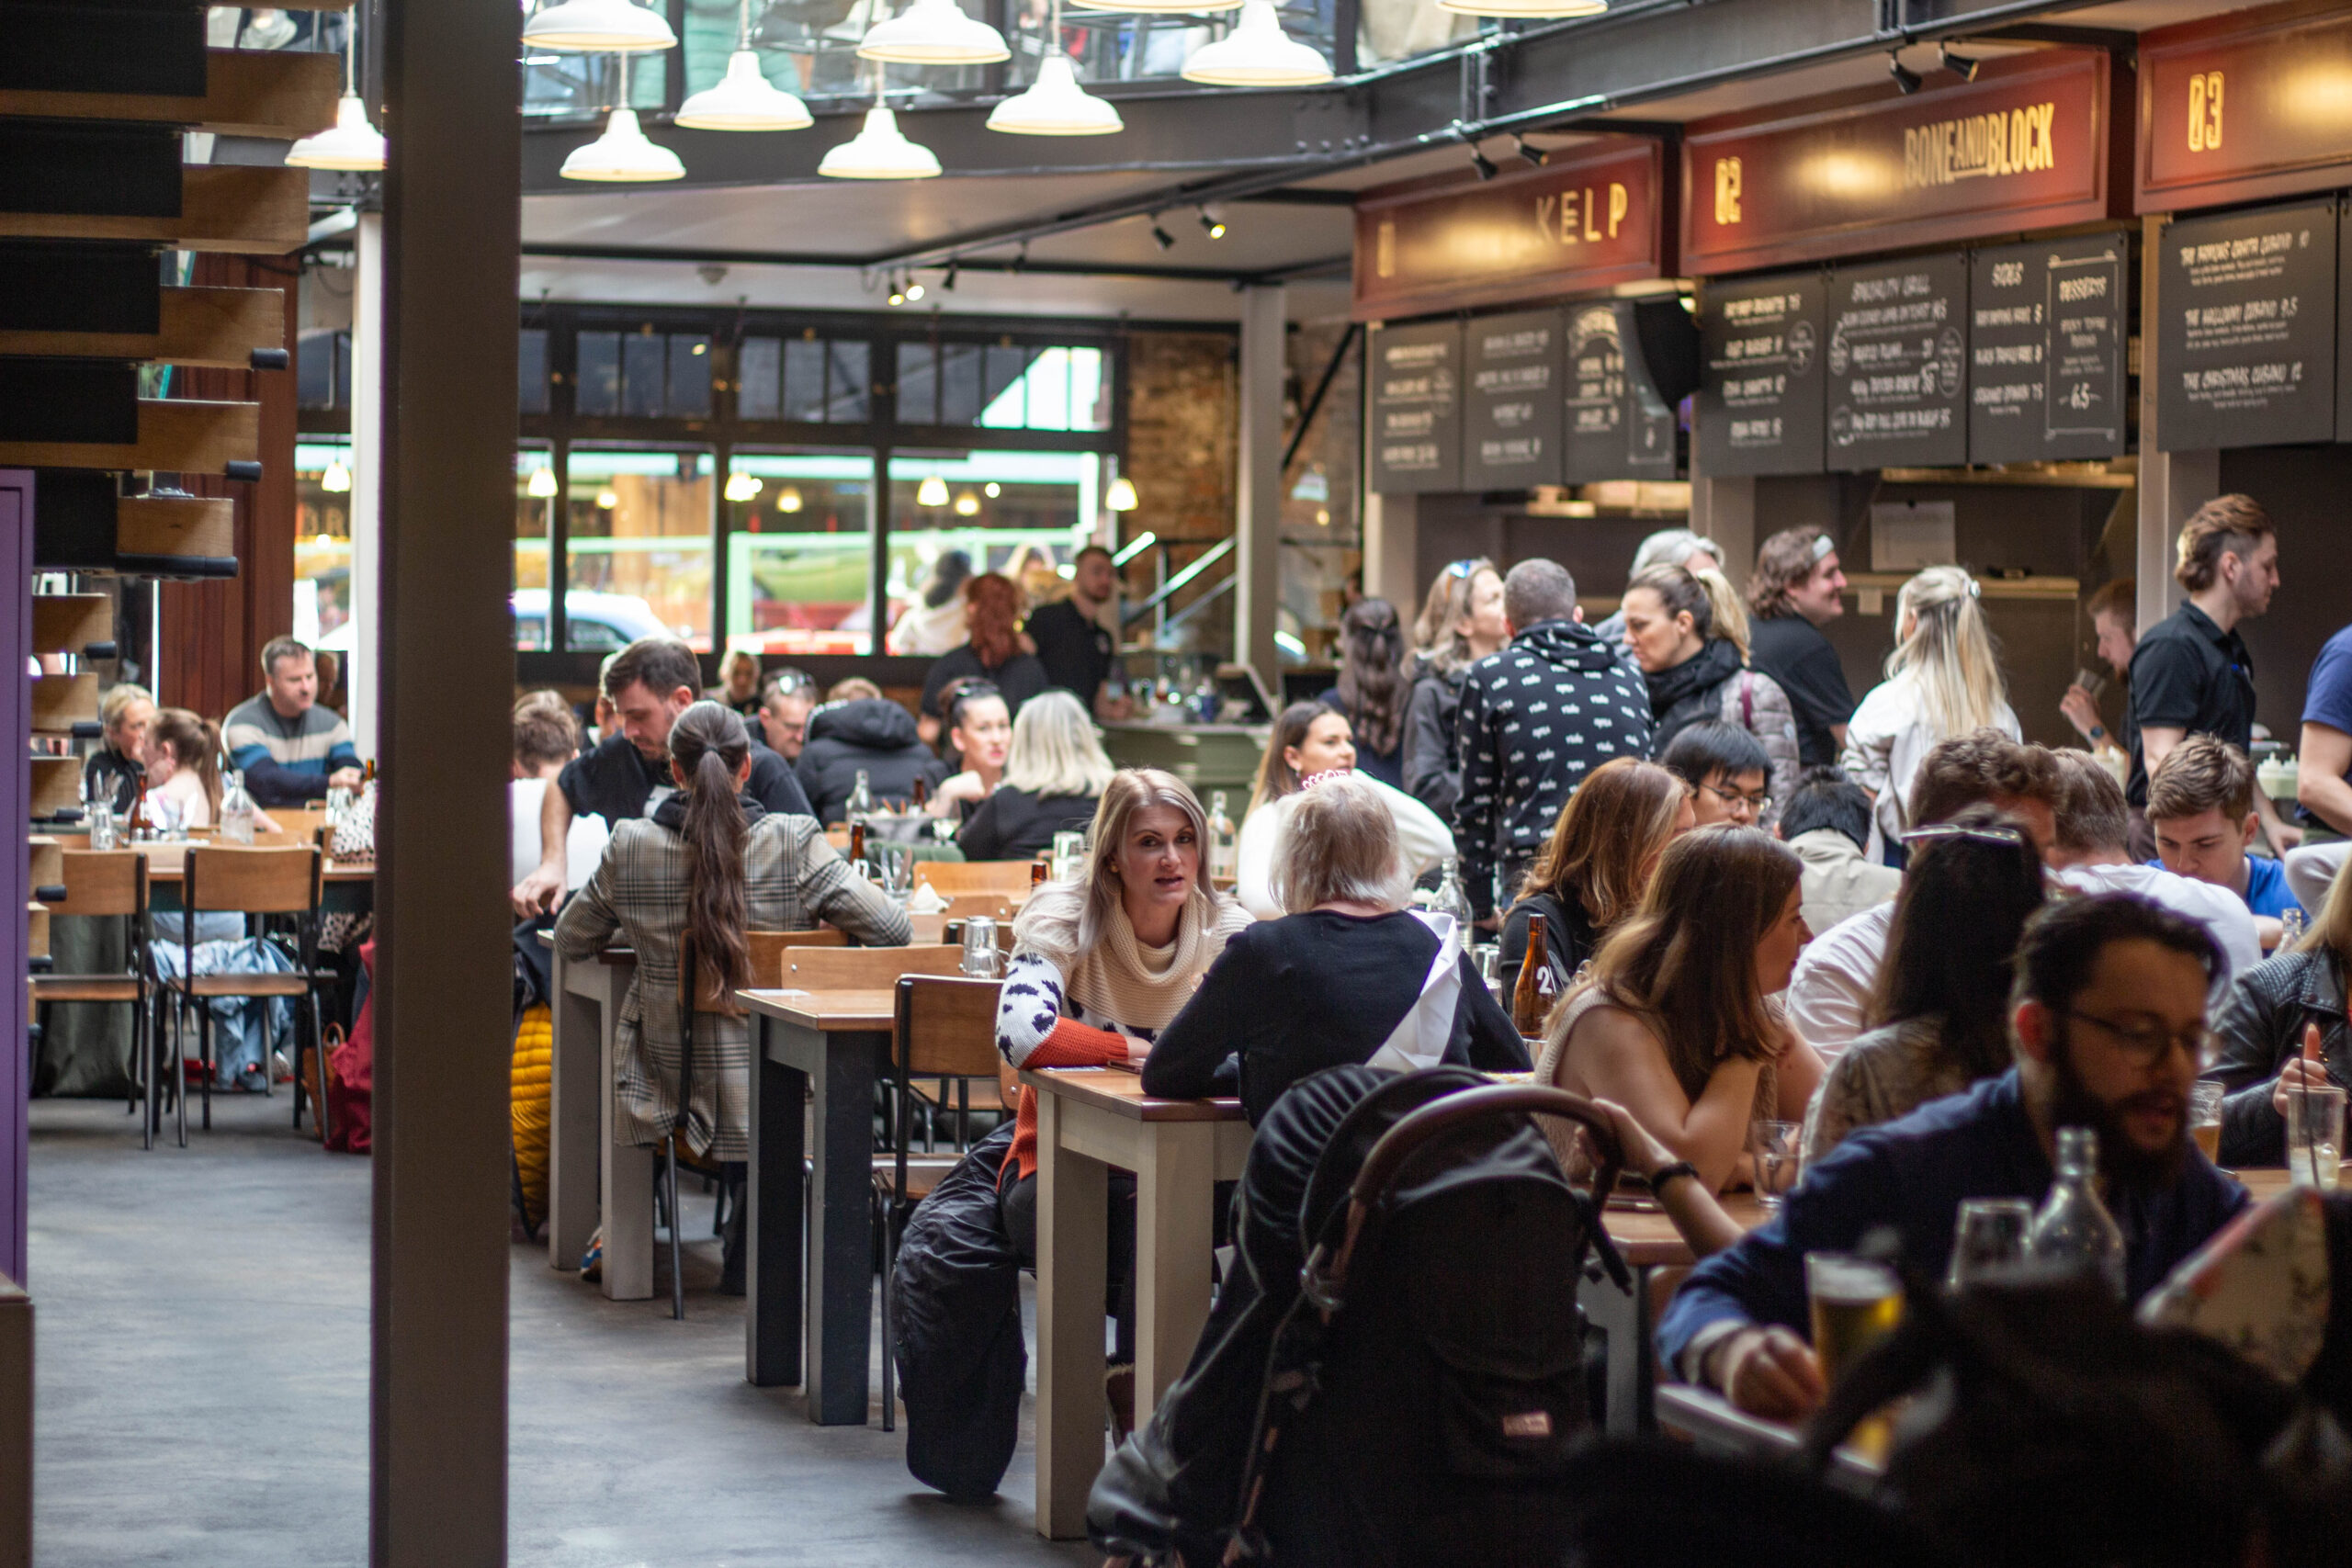 Duke Street Market now open Tuesdays with 20% off all food and drink